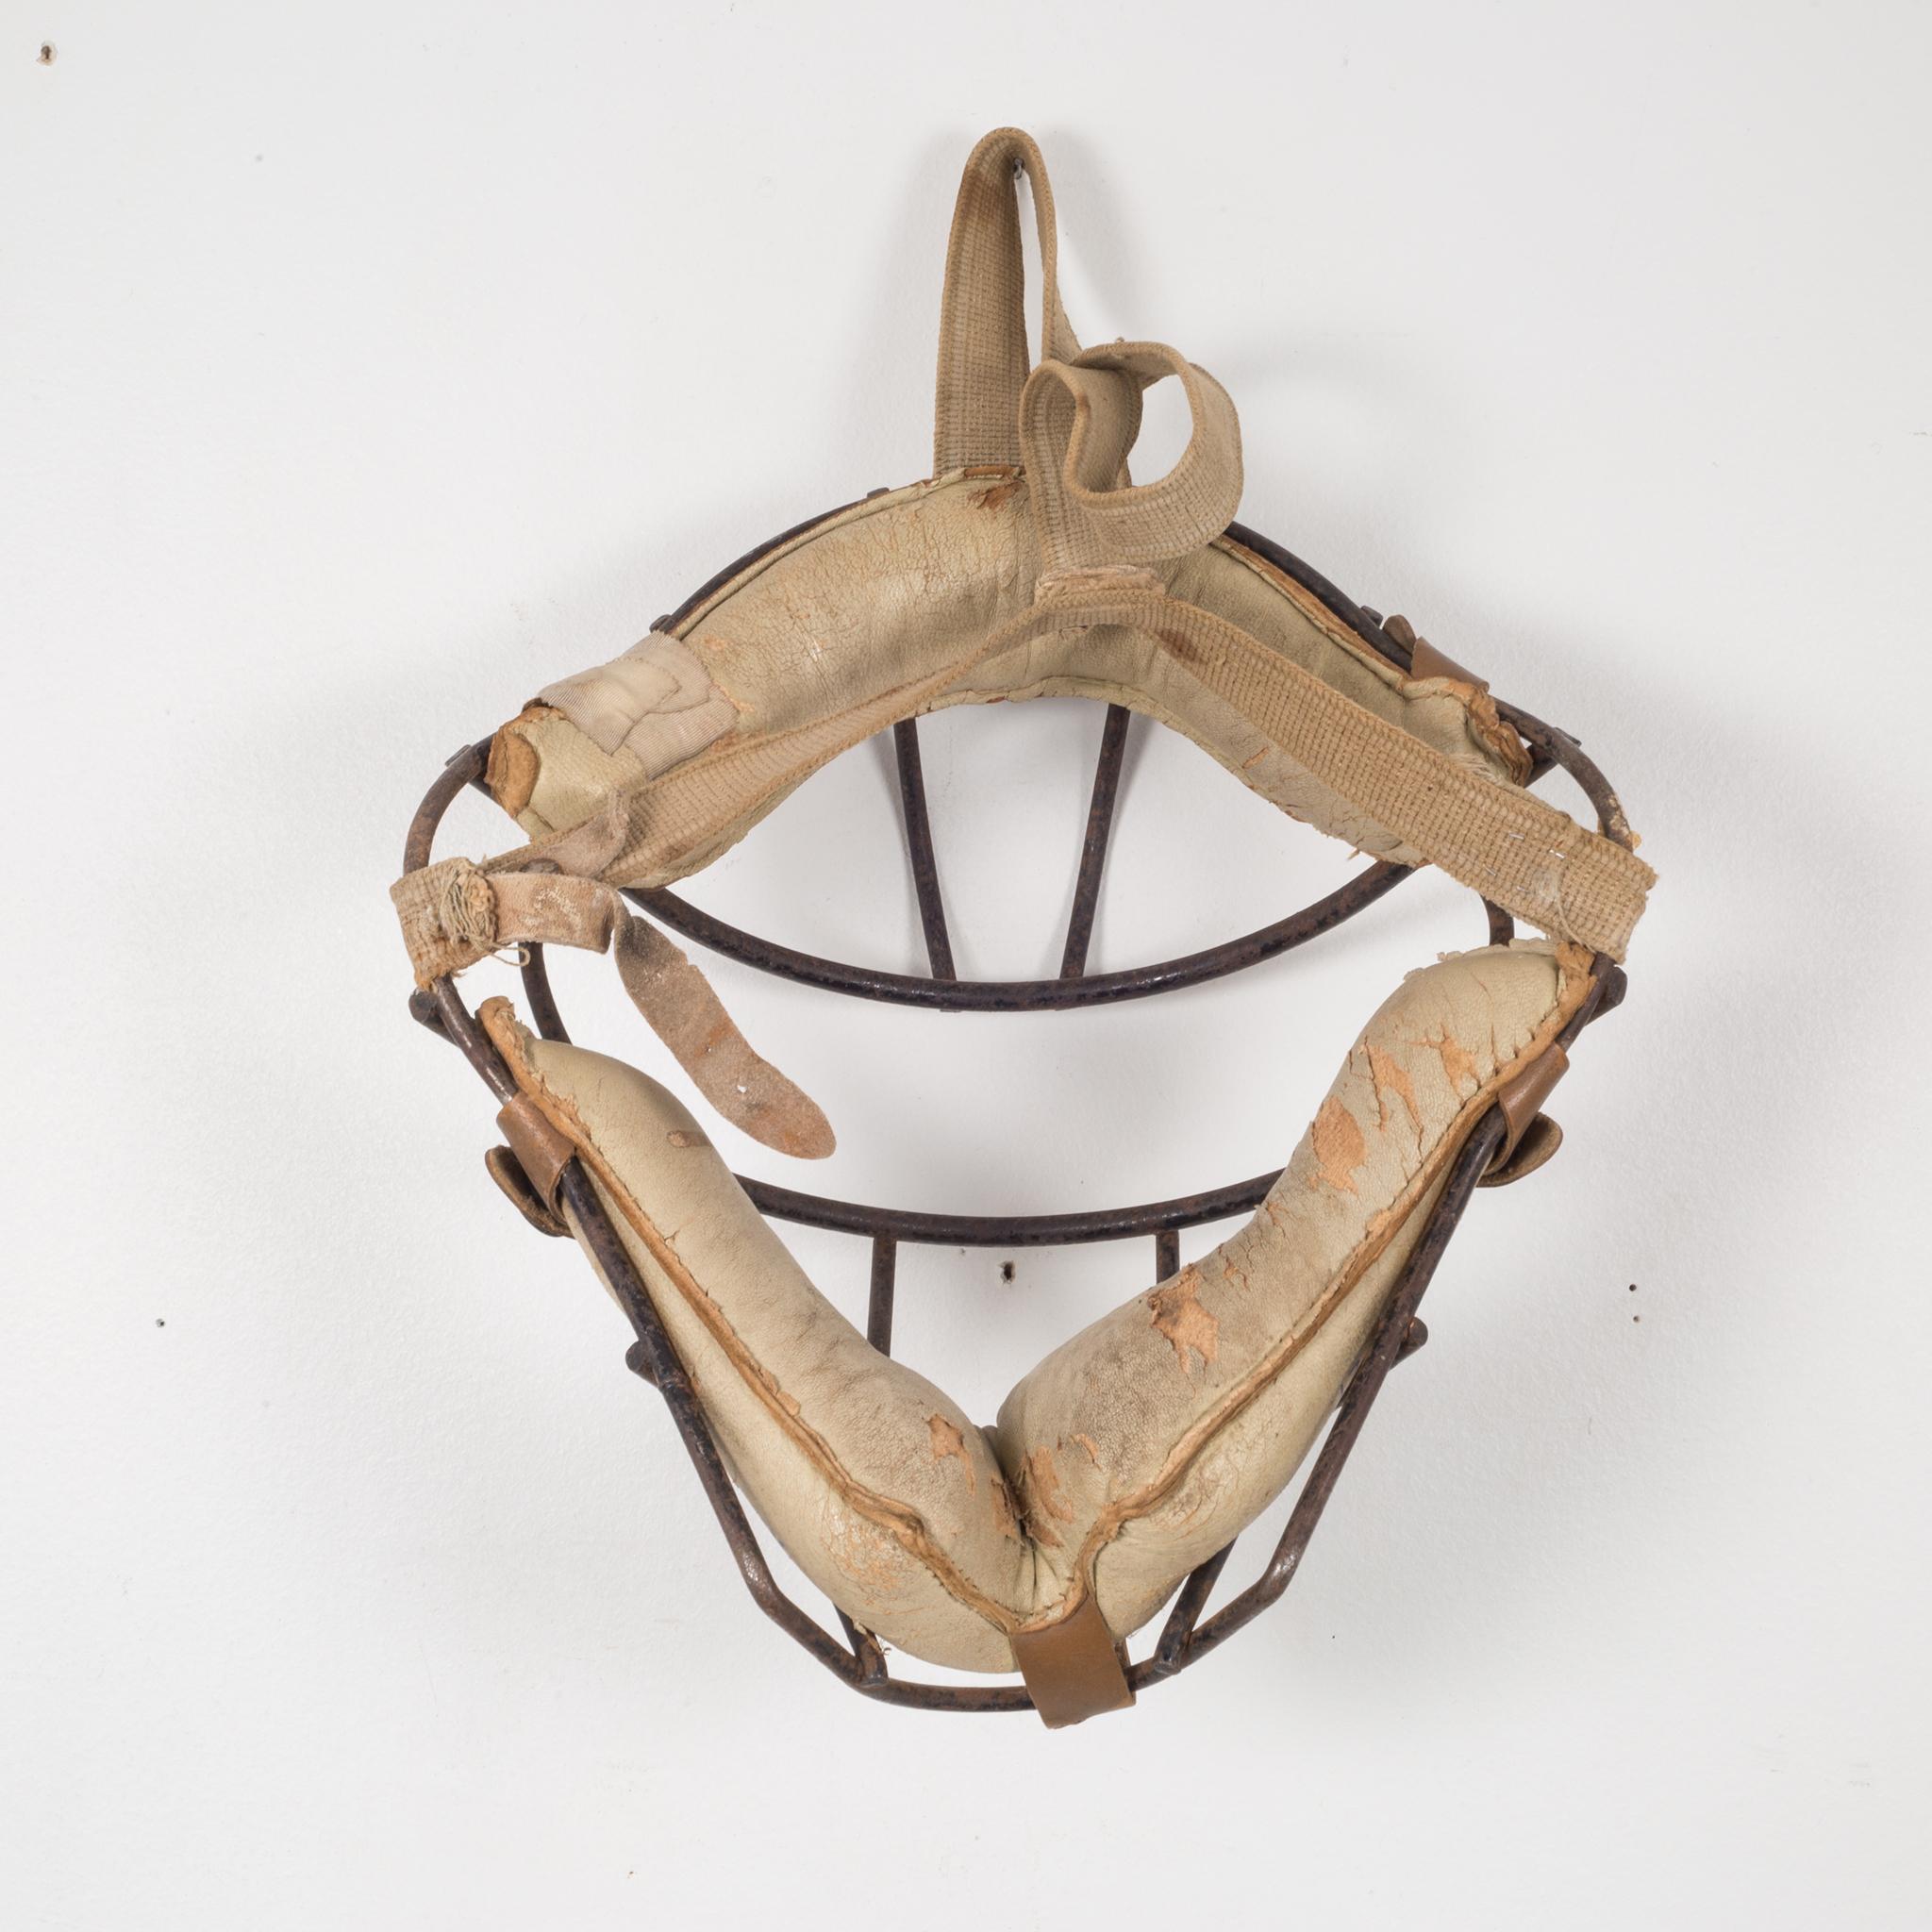 About

This is an original vintage catcher's mask. The main body is steel with thick leather padding and fabric head strap with 